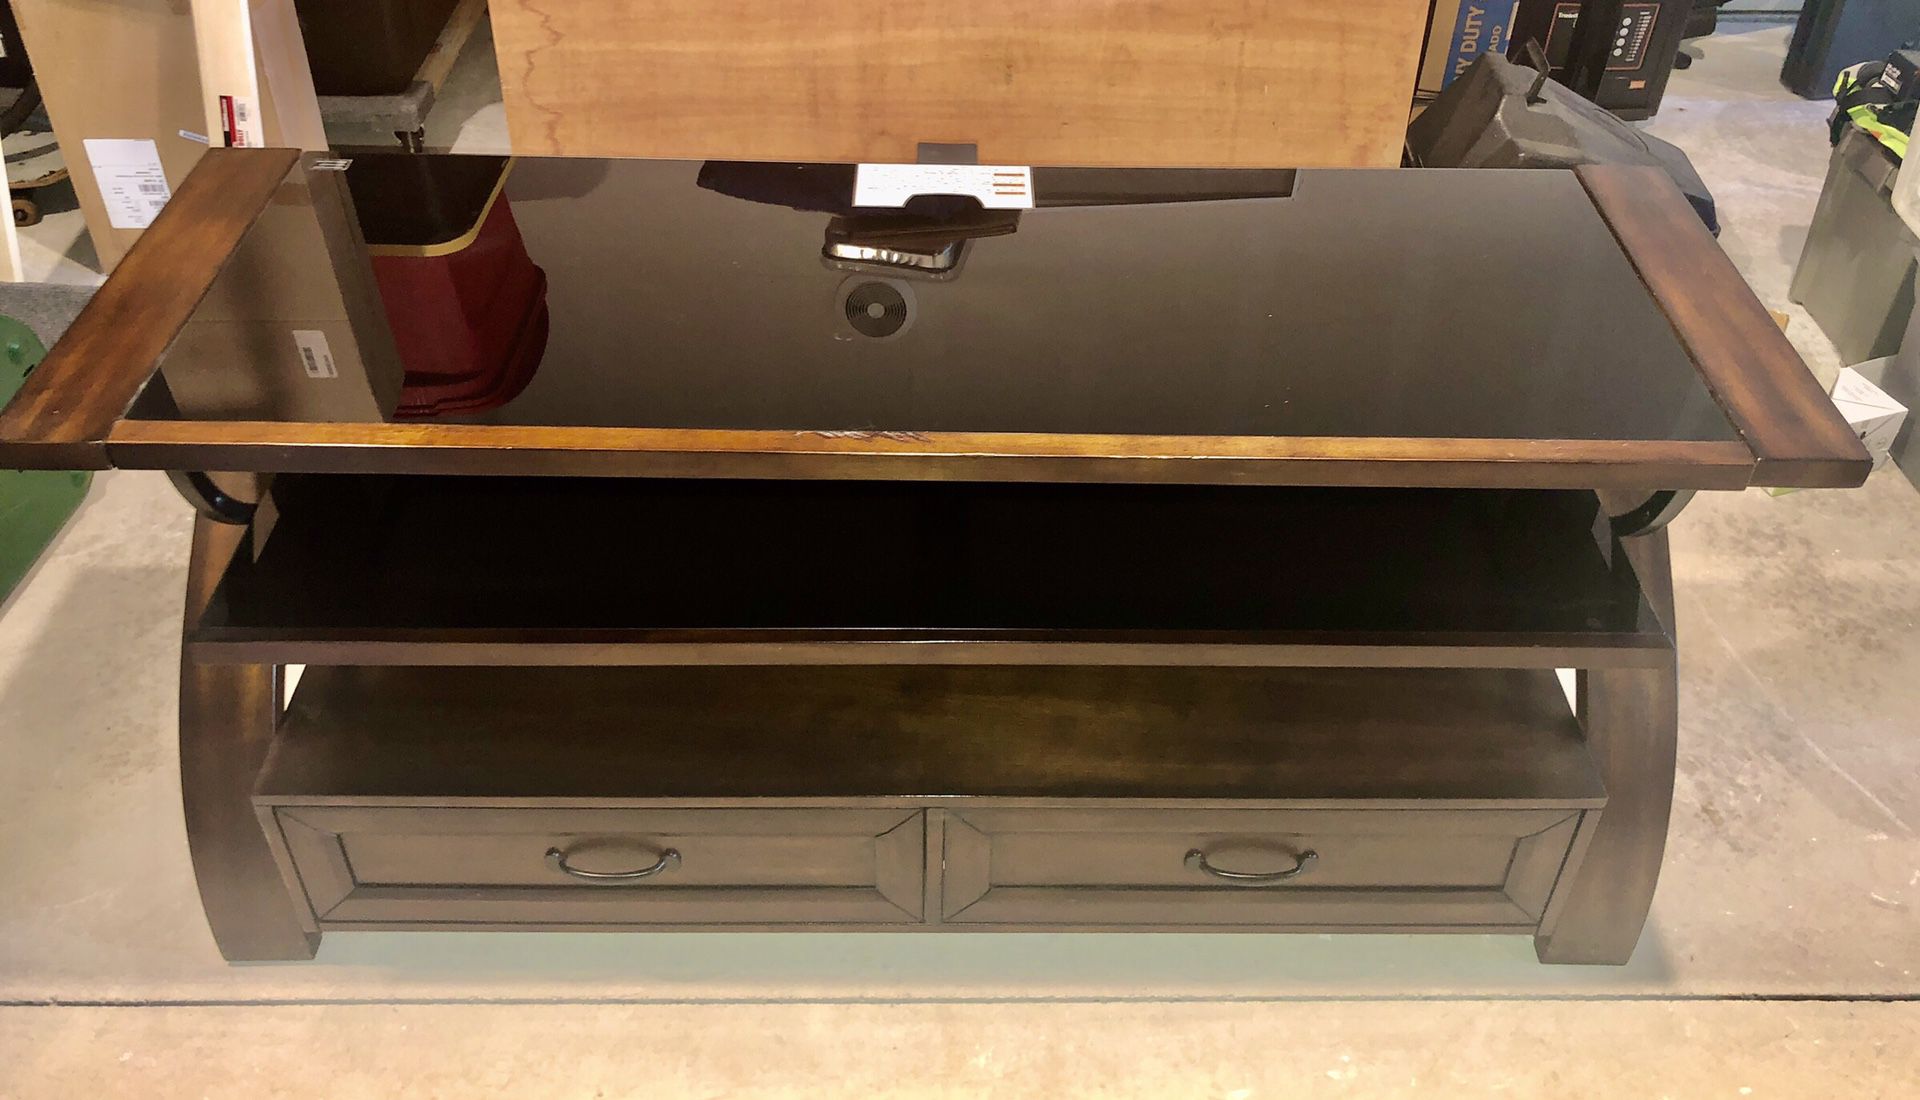 TV stand in good condition 56 in wide x 18 in deep x 24 in high with 2 drawers